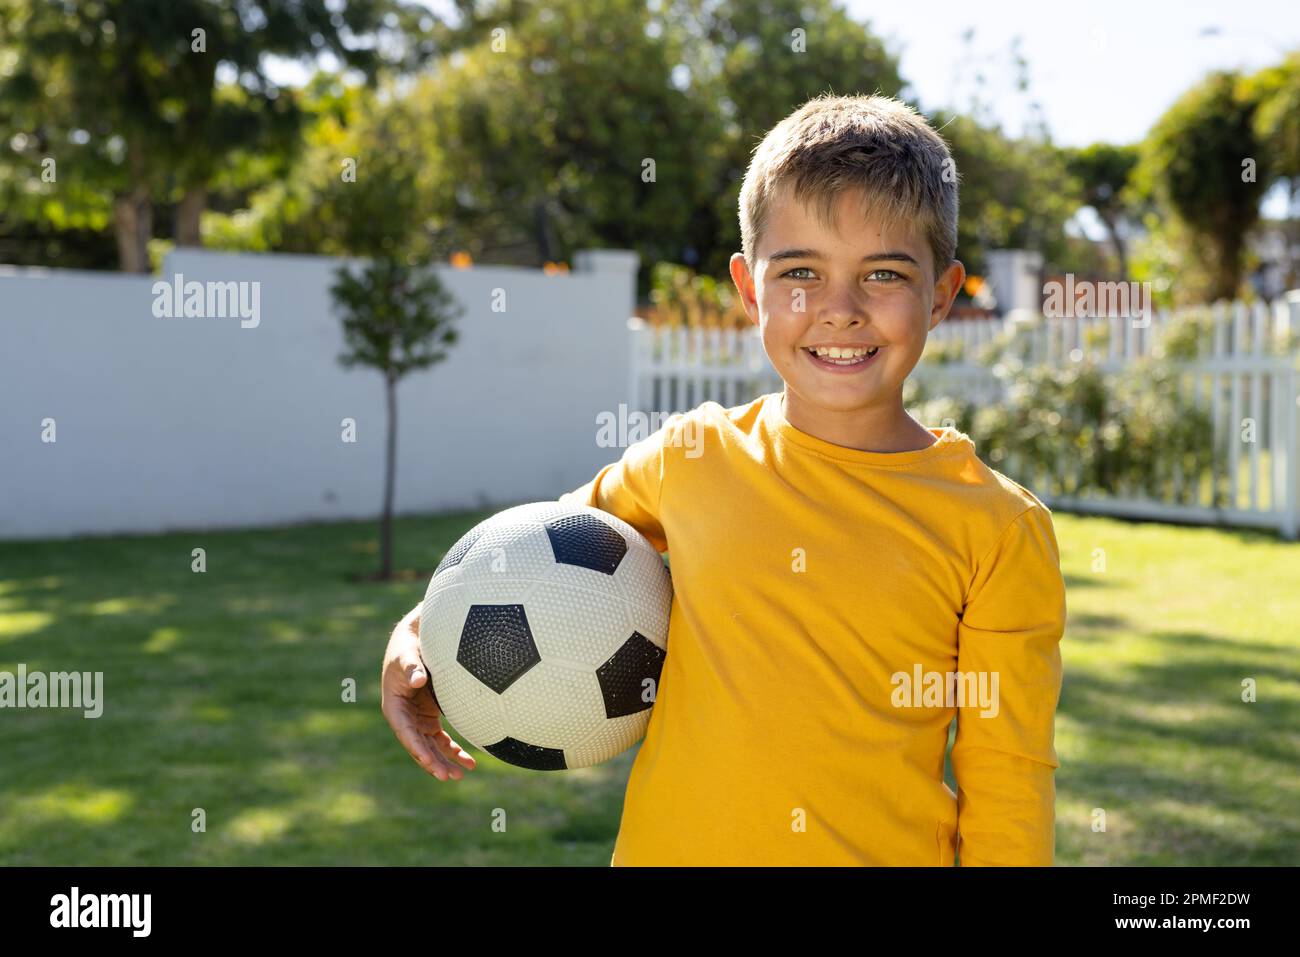 Portrait of cute caucasian boy smiling and holding soccer ball while standing on grassy land in yard Stock Photo